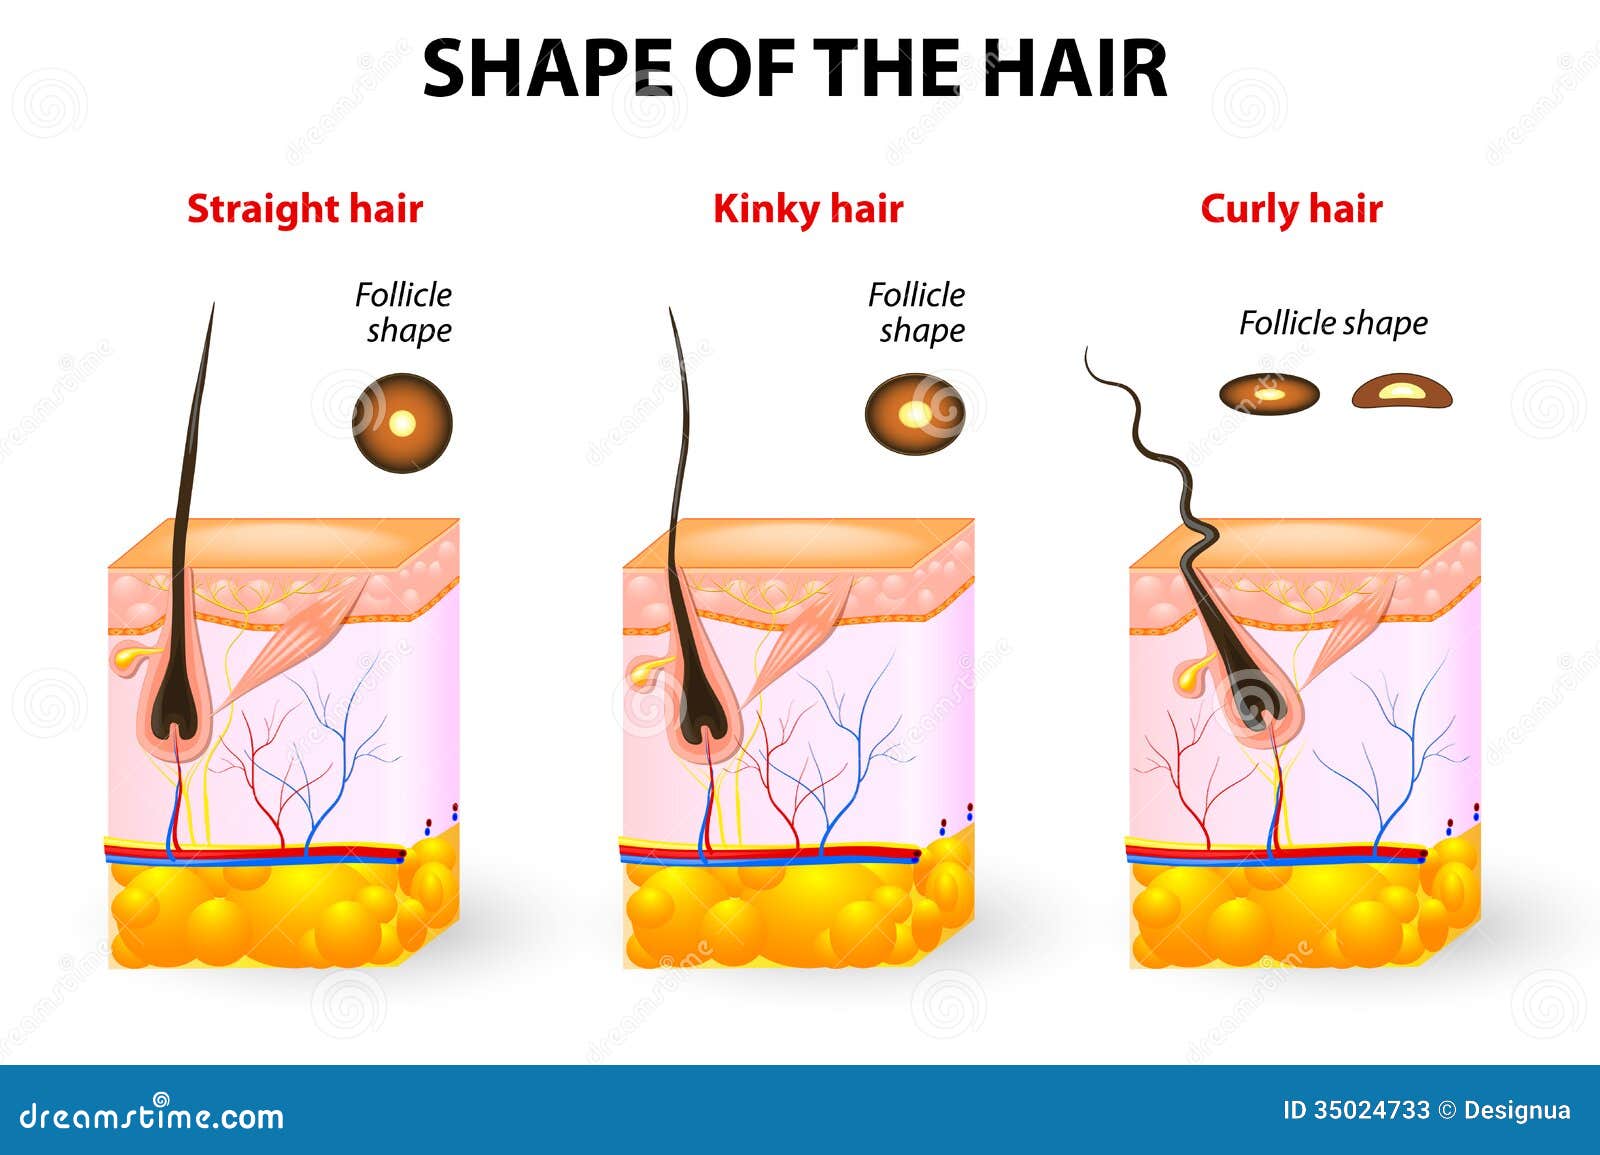  of the hair and hair anatomy